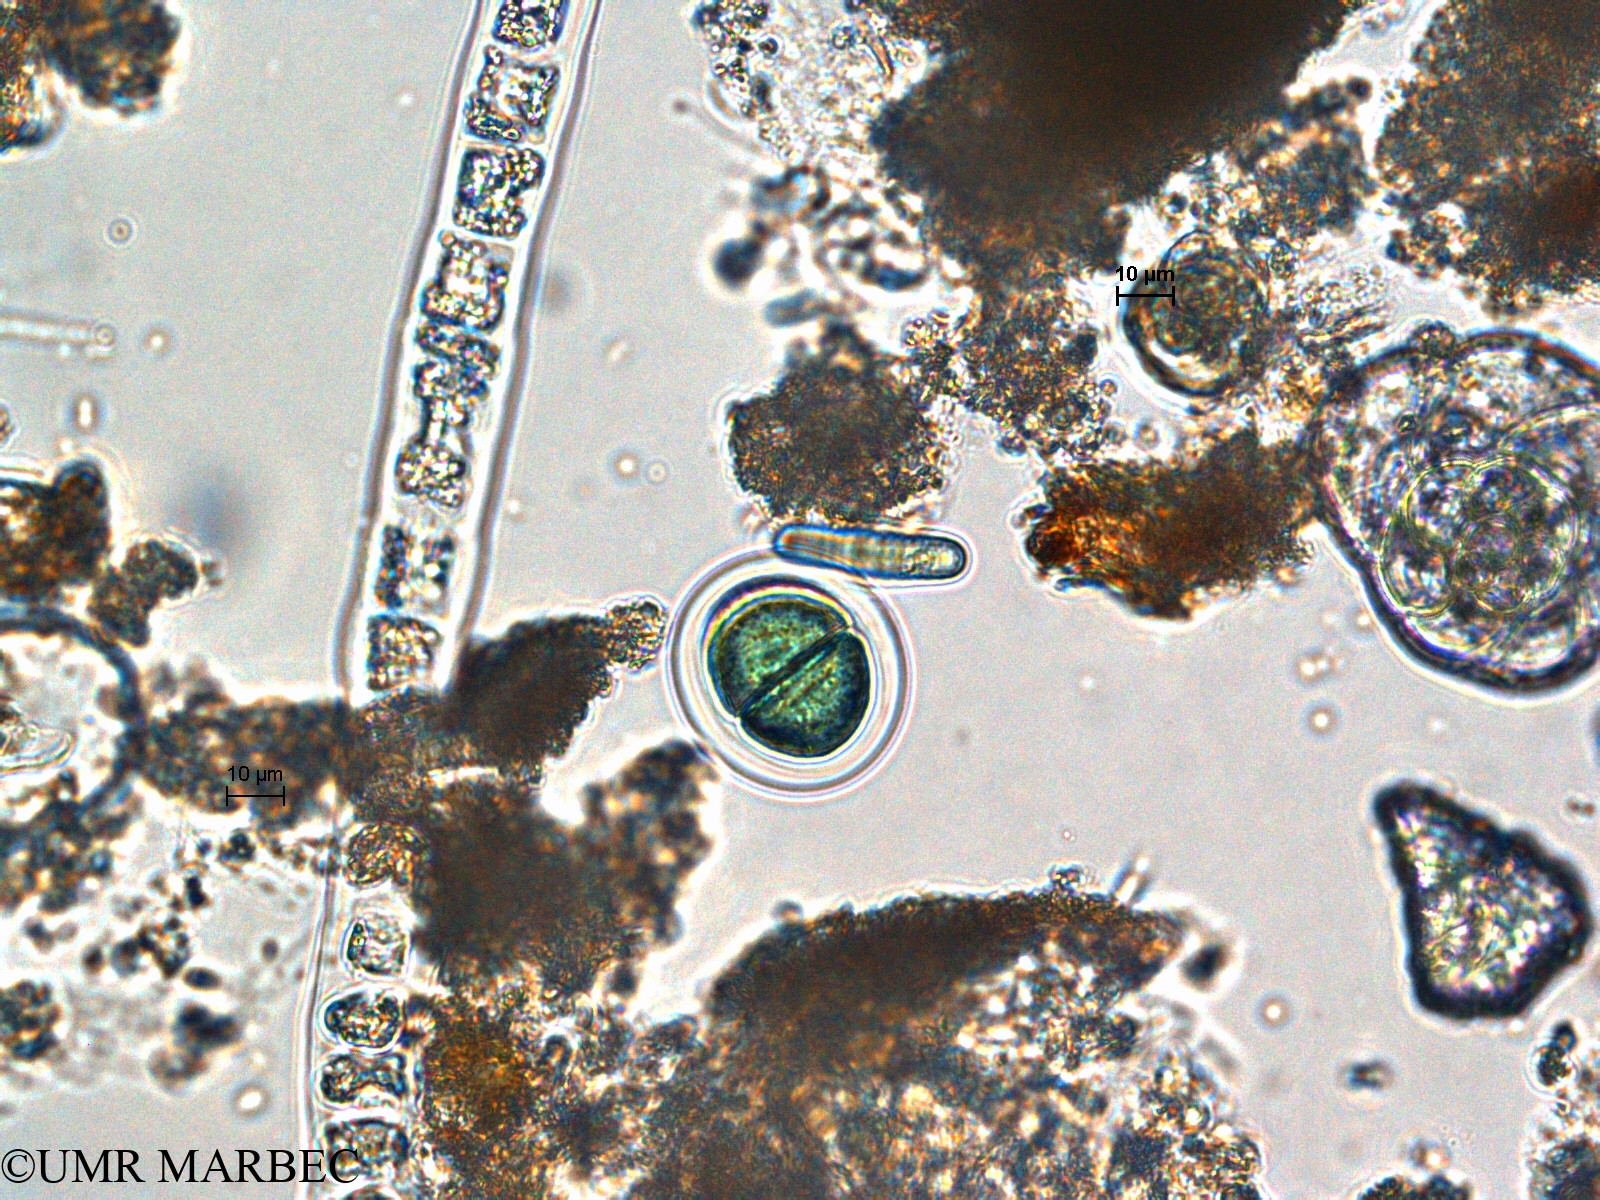 phyto/Scattered_Islands/europa/COMMA April 2011/Chroococcus sp4 (1)(copy).jpg